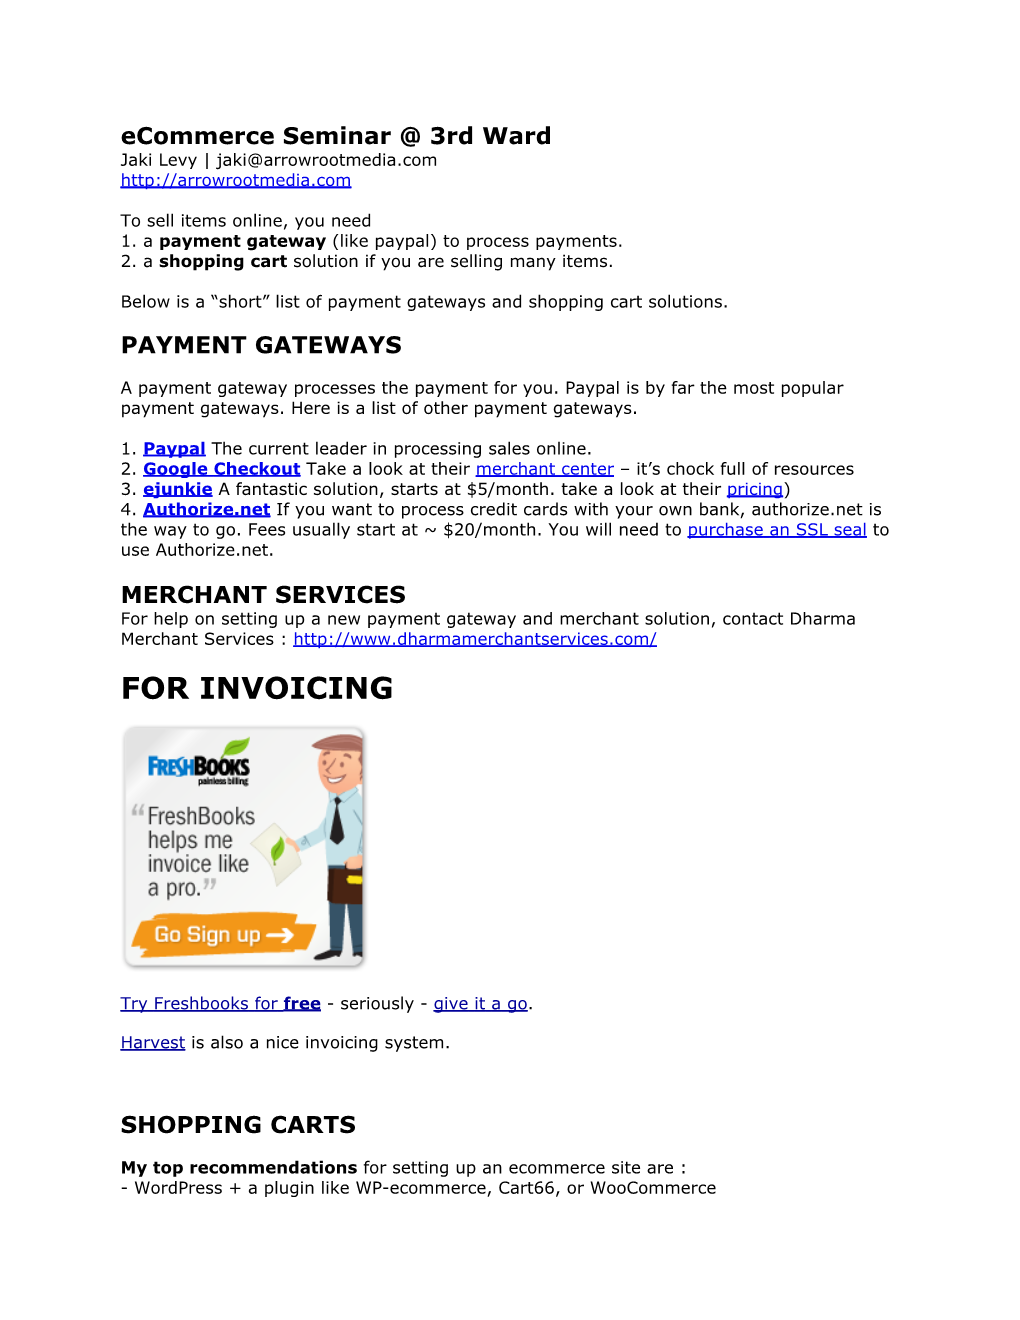 For Invoicing